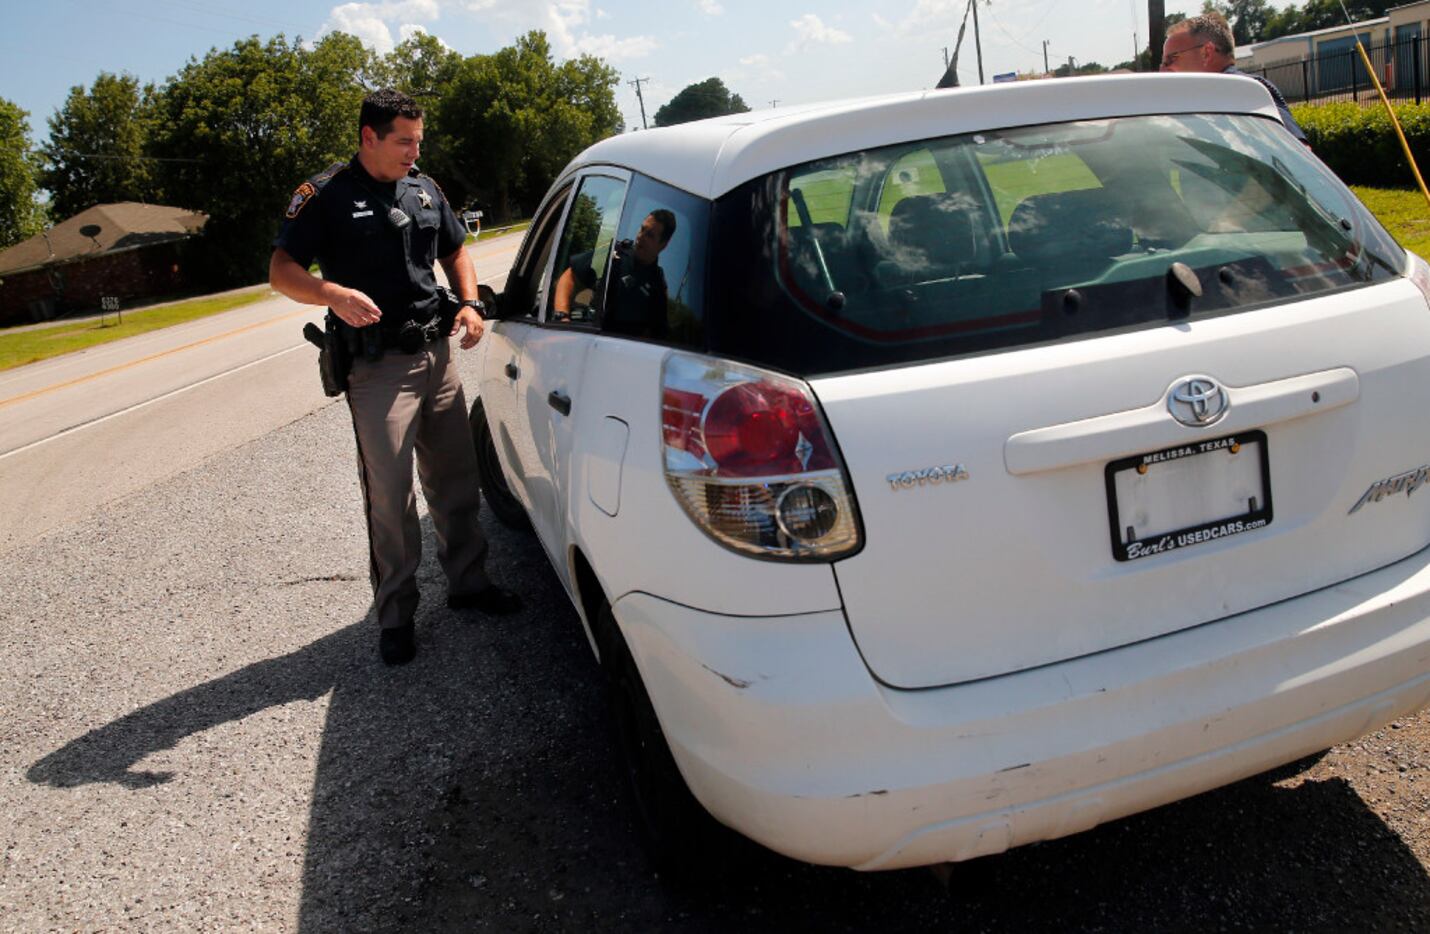 Collin County Sheriff's Deputy Rodney Tackett visits with a driver whose car was missing...